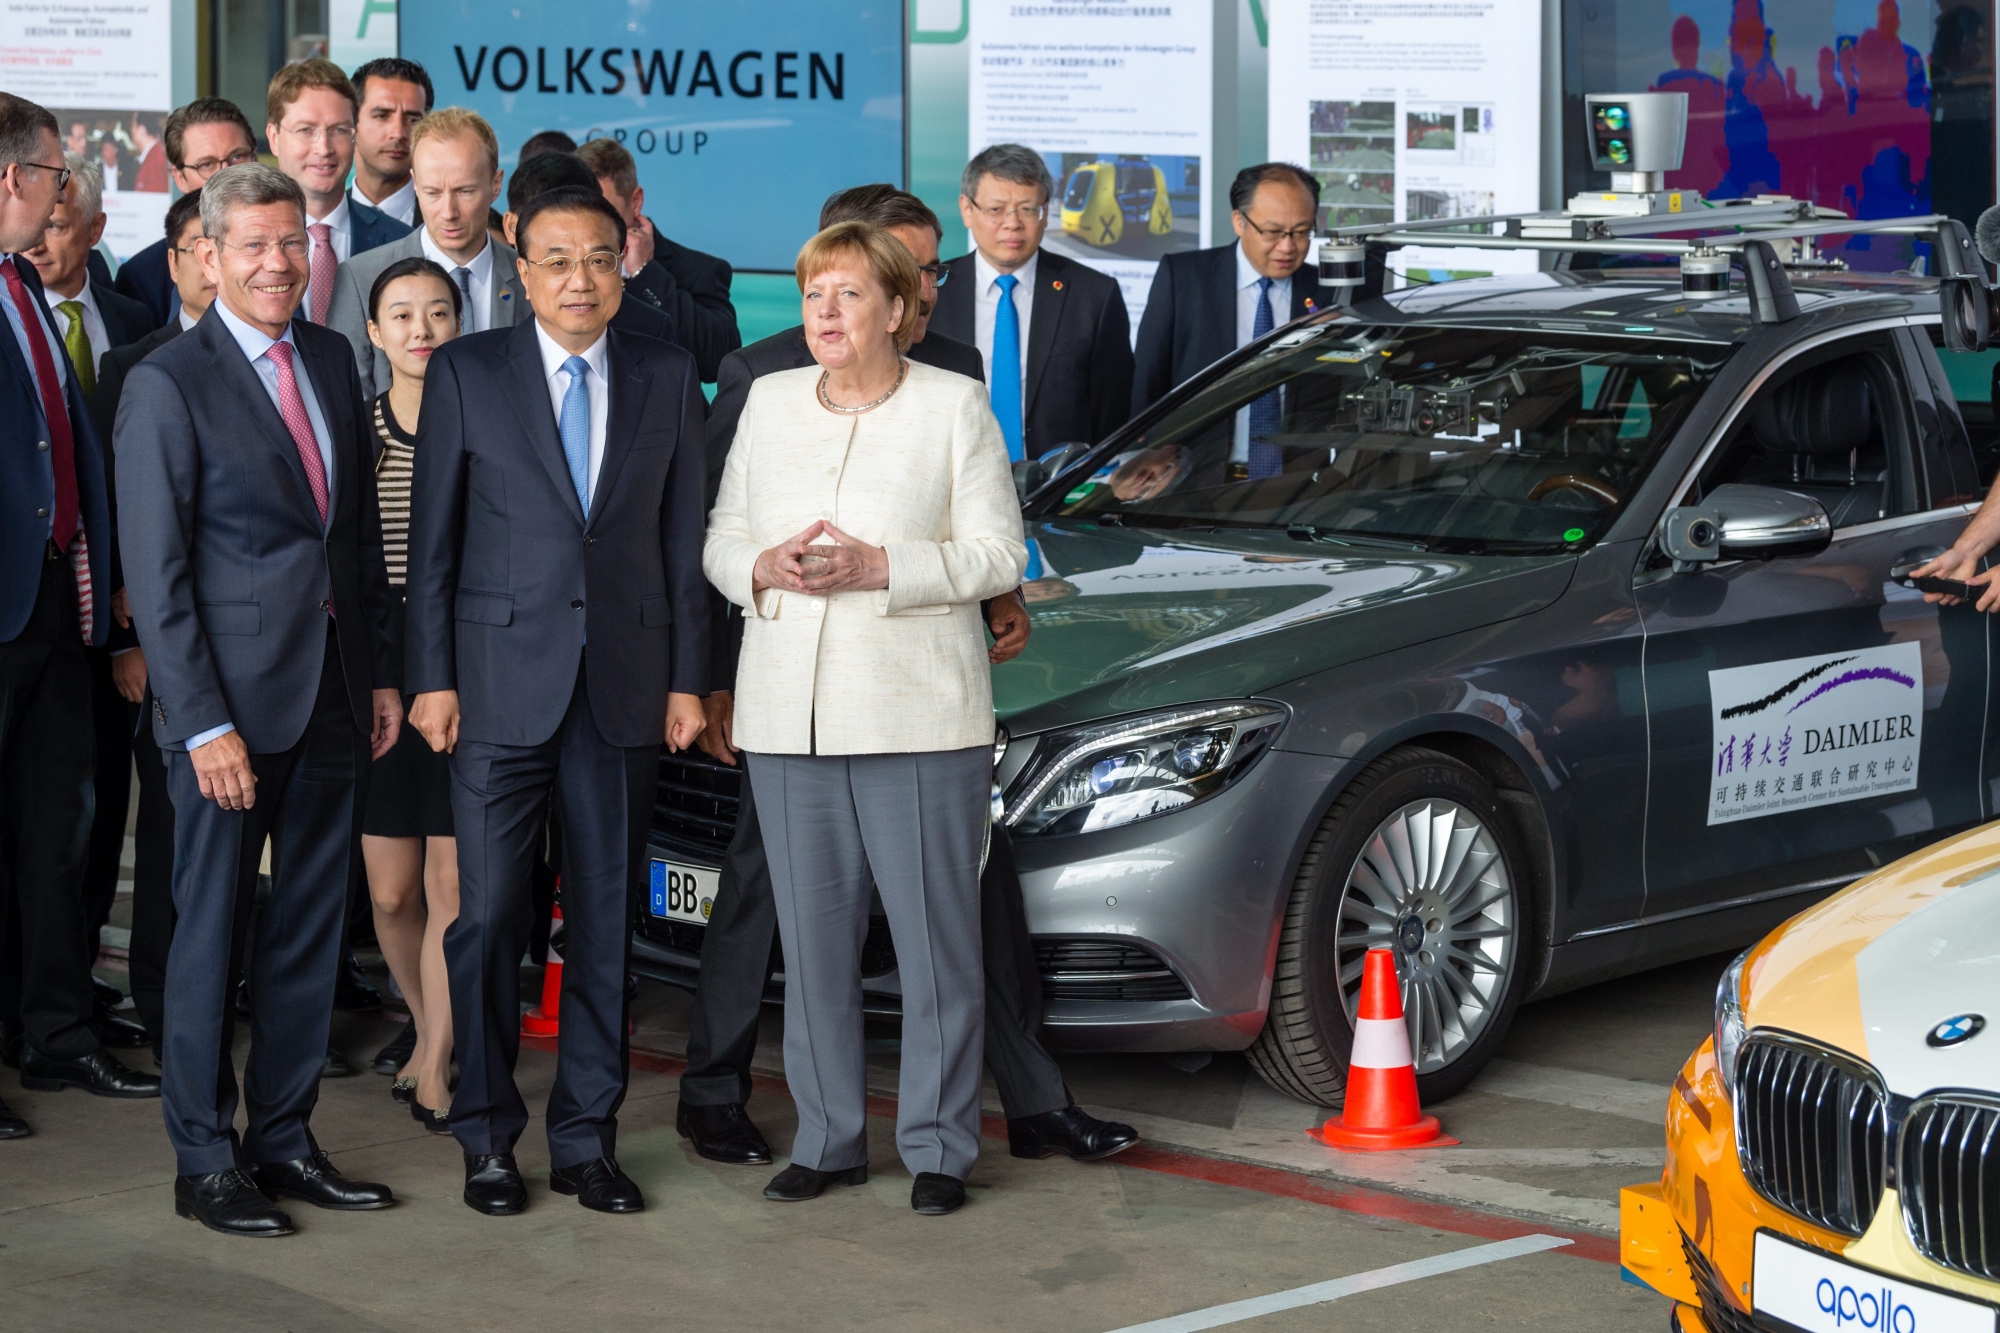 epa06877439 Chinese Premier Li Keqiang (C), German Chancellor Angela Merkel (R) and Bernhard Mattes (L), President of the Association of the Automotive Industry (VDA), during a presentation on autonomous driving during the 5th German-Chinese government consultations in Berlin, Germany, 10 July 2018. The main topic of the intergovernmental consultations taking place form 08 to 10 July in Berlin will be the deepening of German-Chinese cooperation with a special focus on questions of economic exchange.  EPA/JENS SCHLUETER DEUTSCHLAND BESUCH CHINA